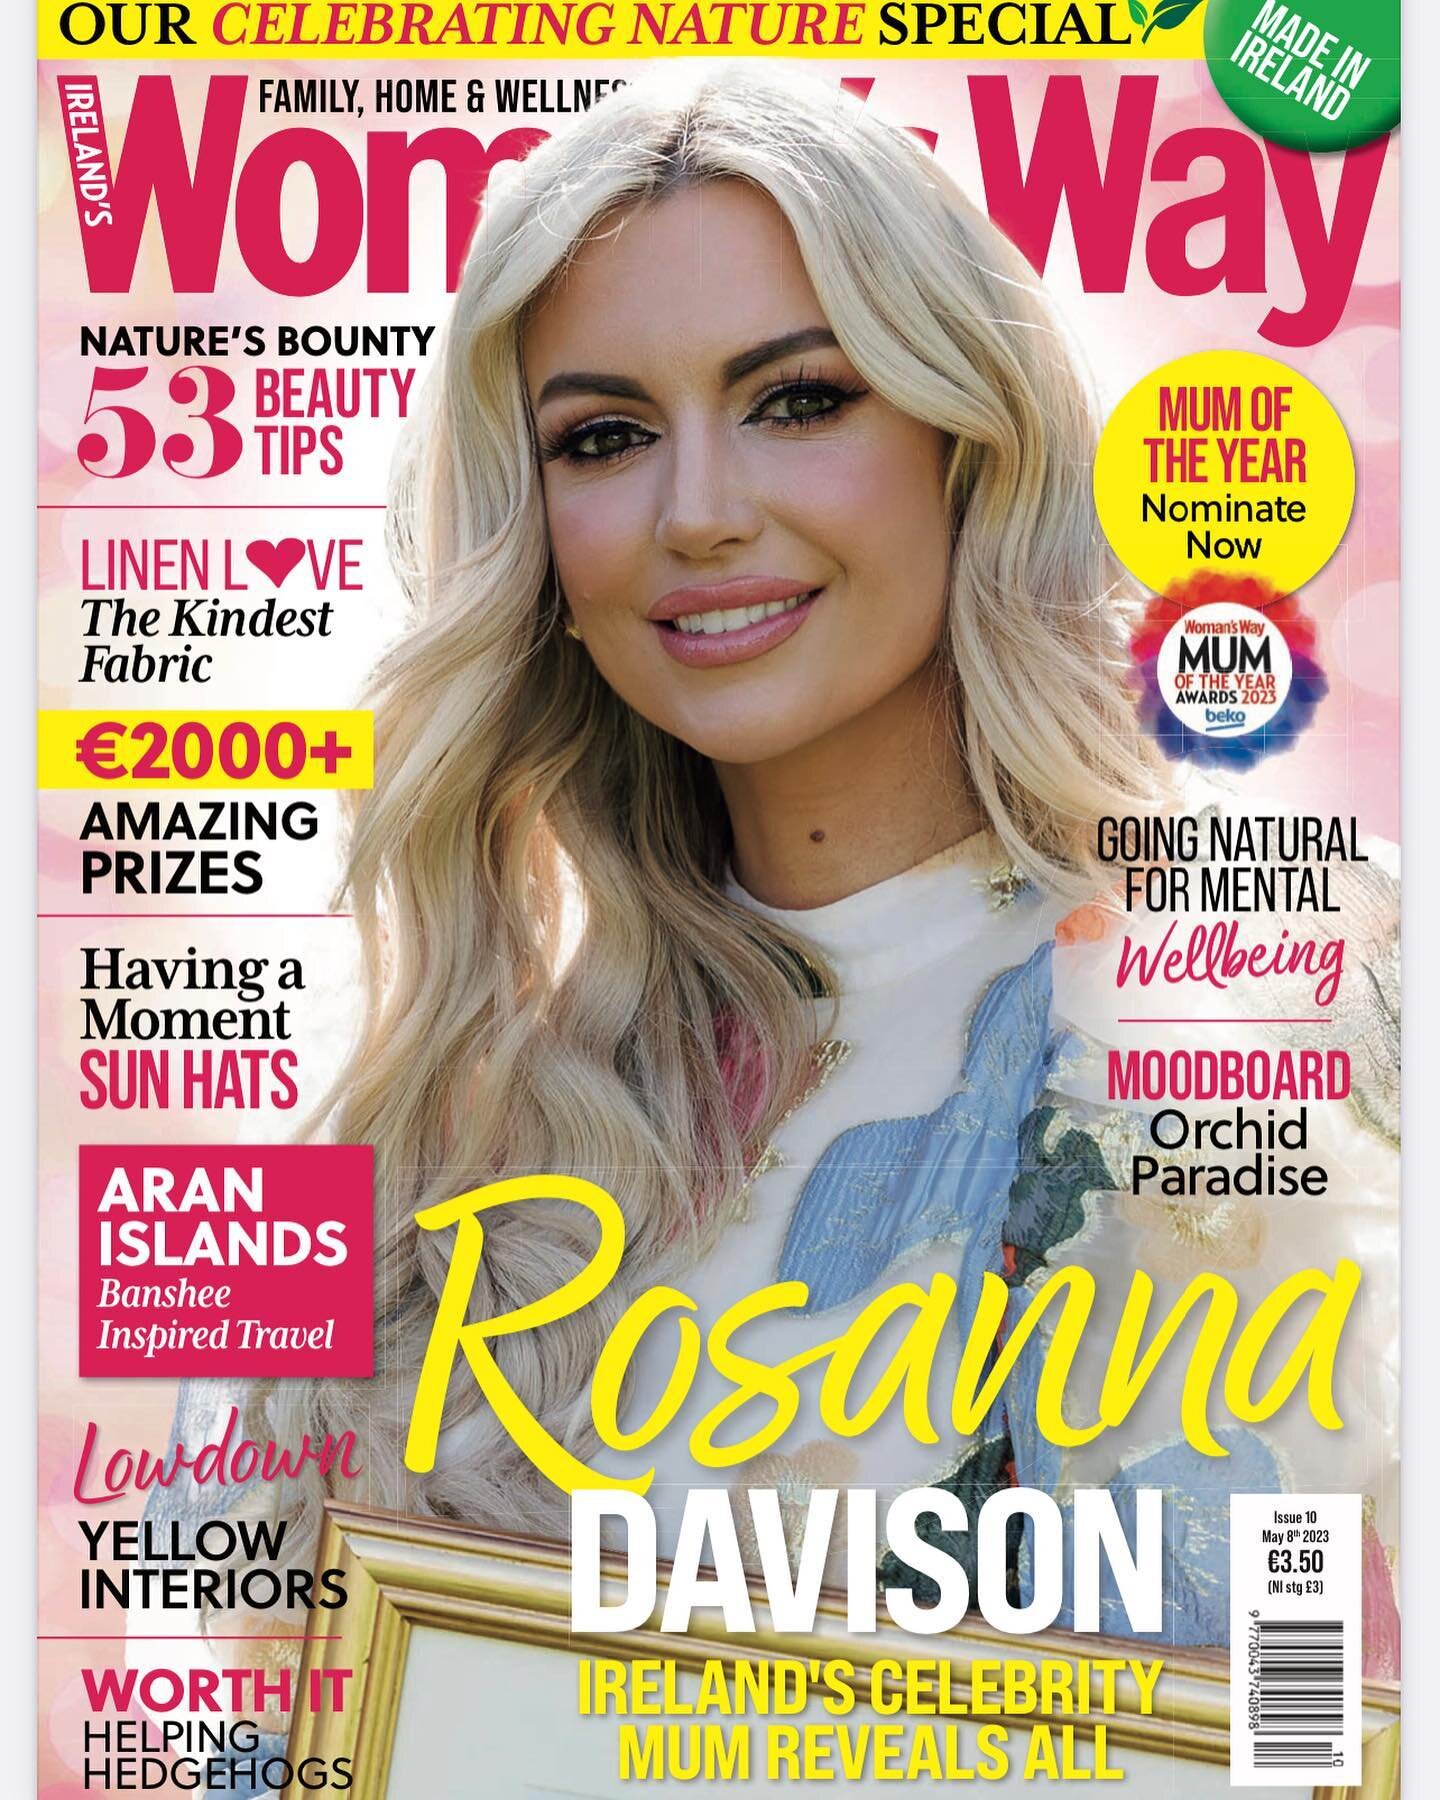 Woman&rsquo;s Way celebrity mum of the year @rosanna_davison is on the cover of the new issue and she chats about juggling three under four. And who better to help us kick off our Woman&rsquo;s Way @bekogb Mum of the Year Awards? 

This issue we&rsqu